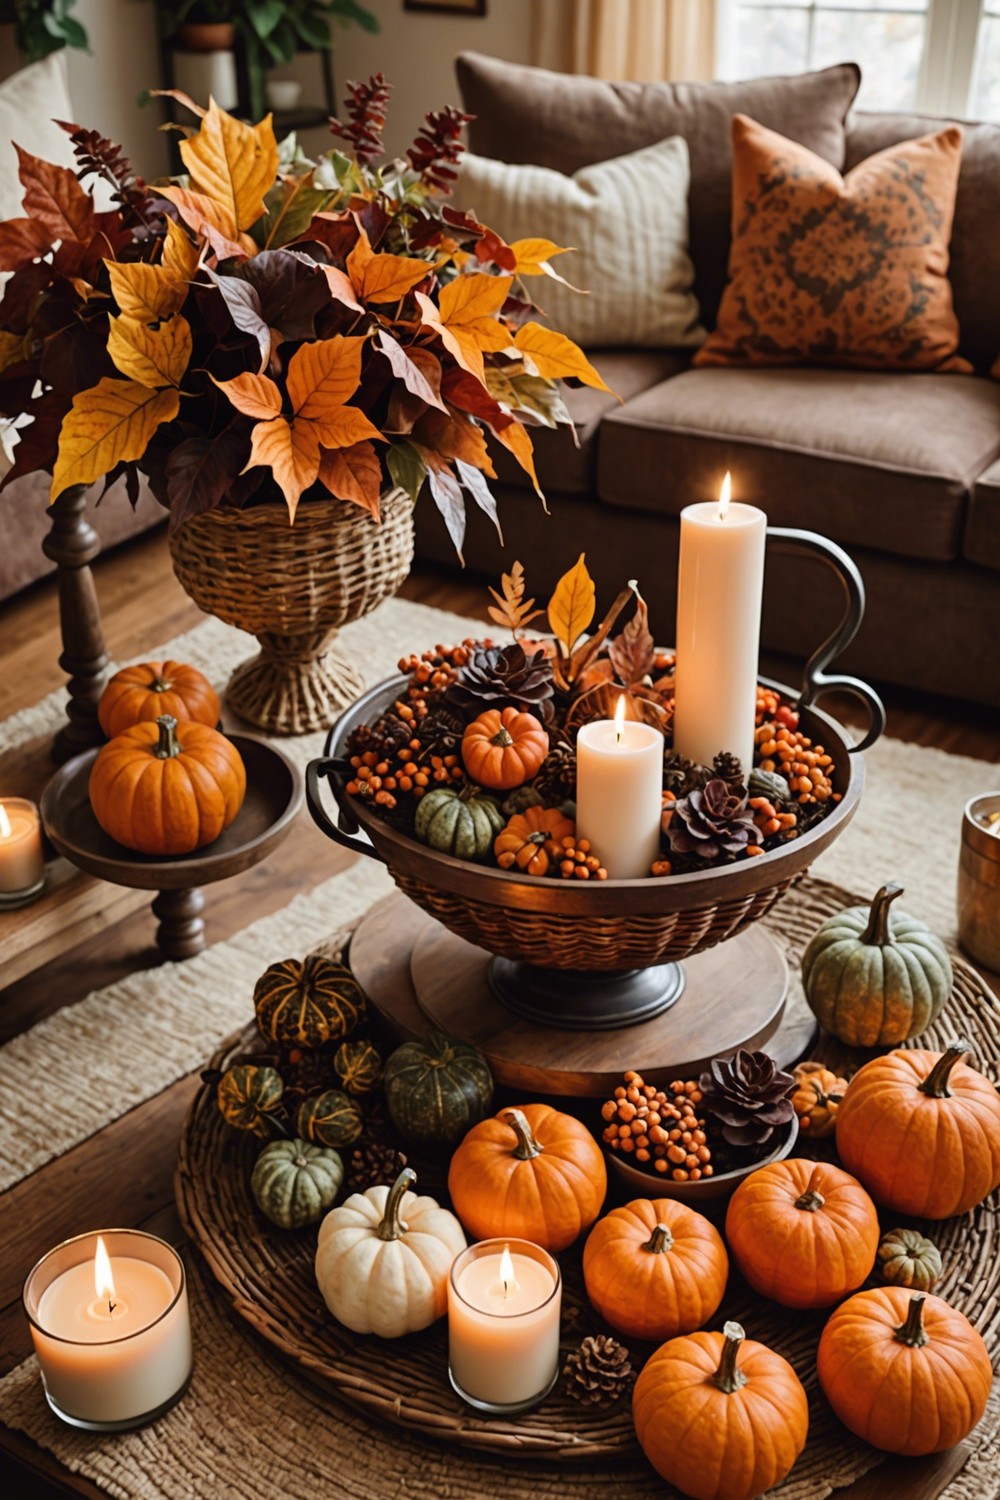 Bring Fall Indoors with Plants